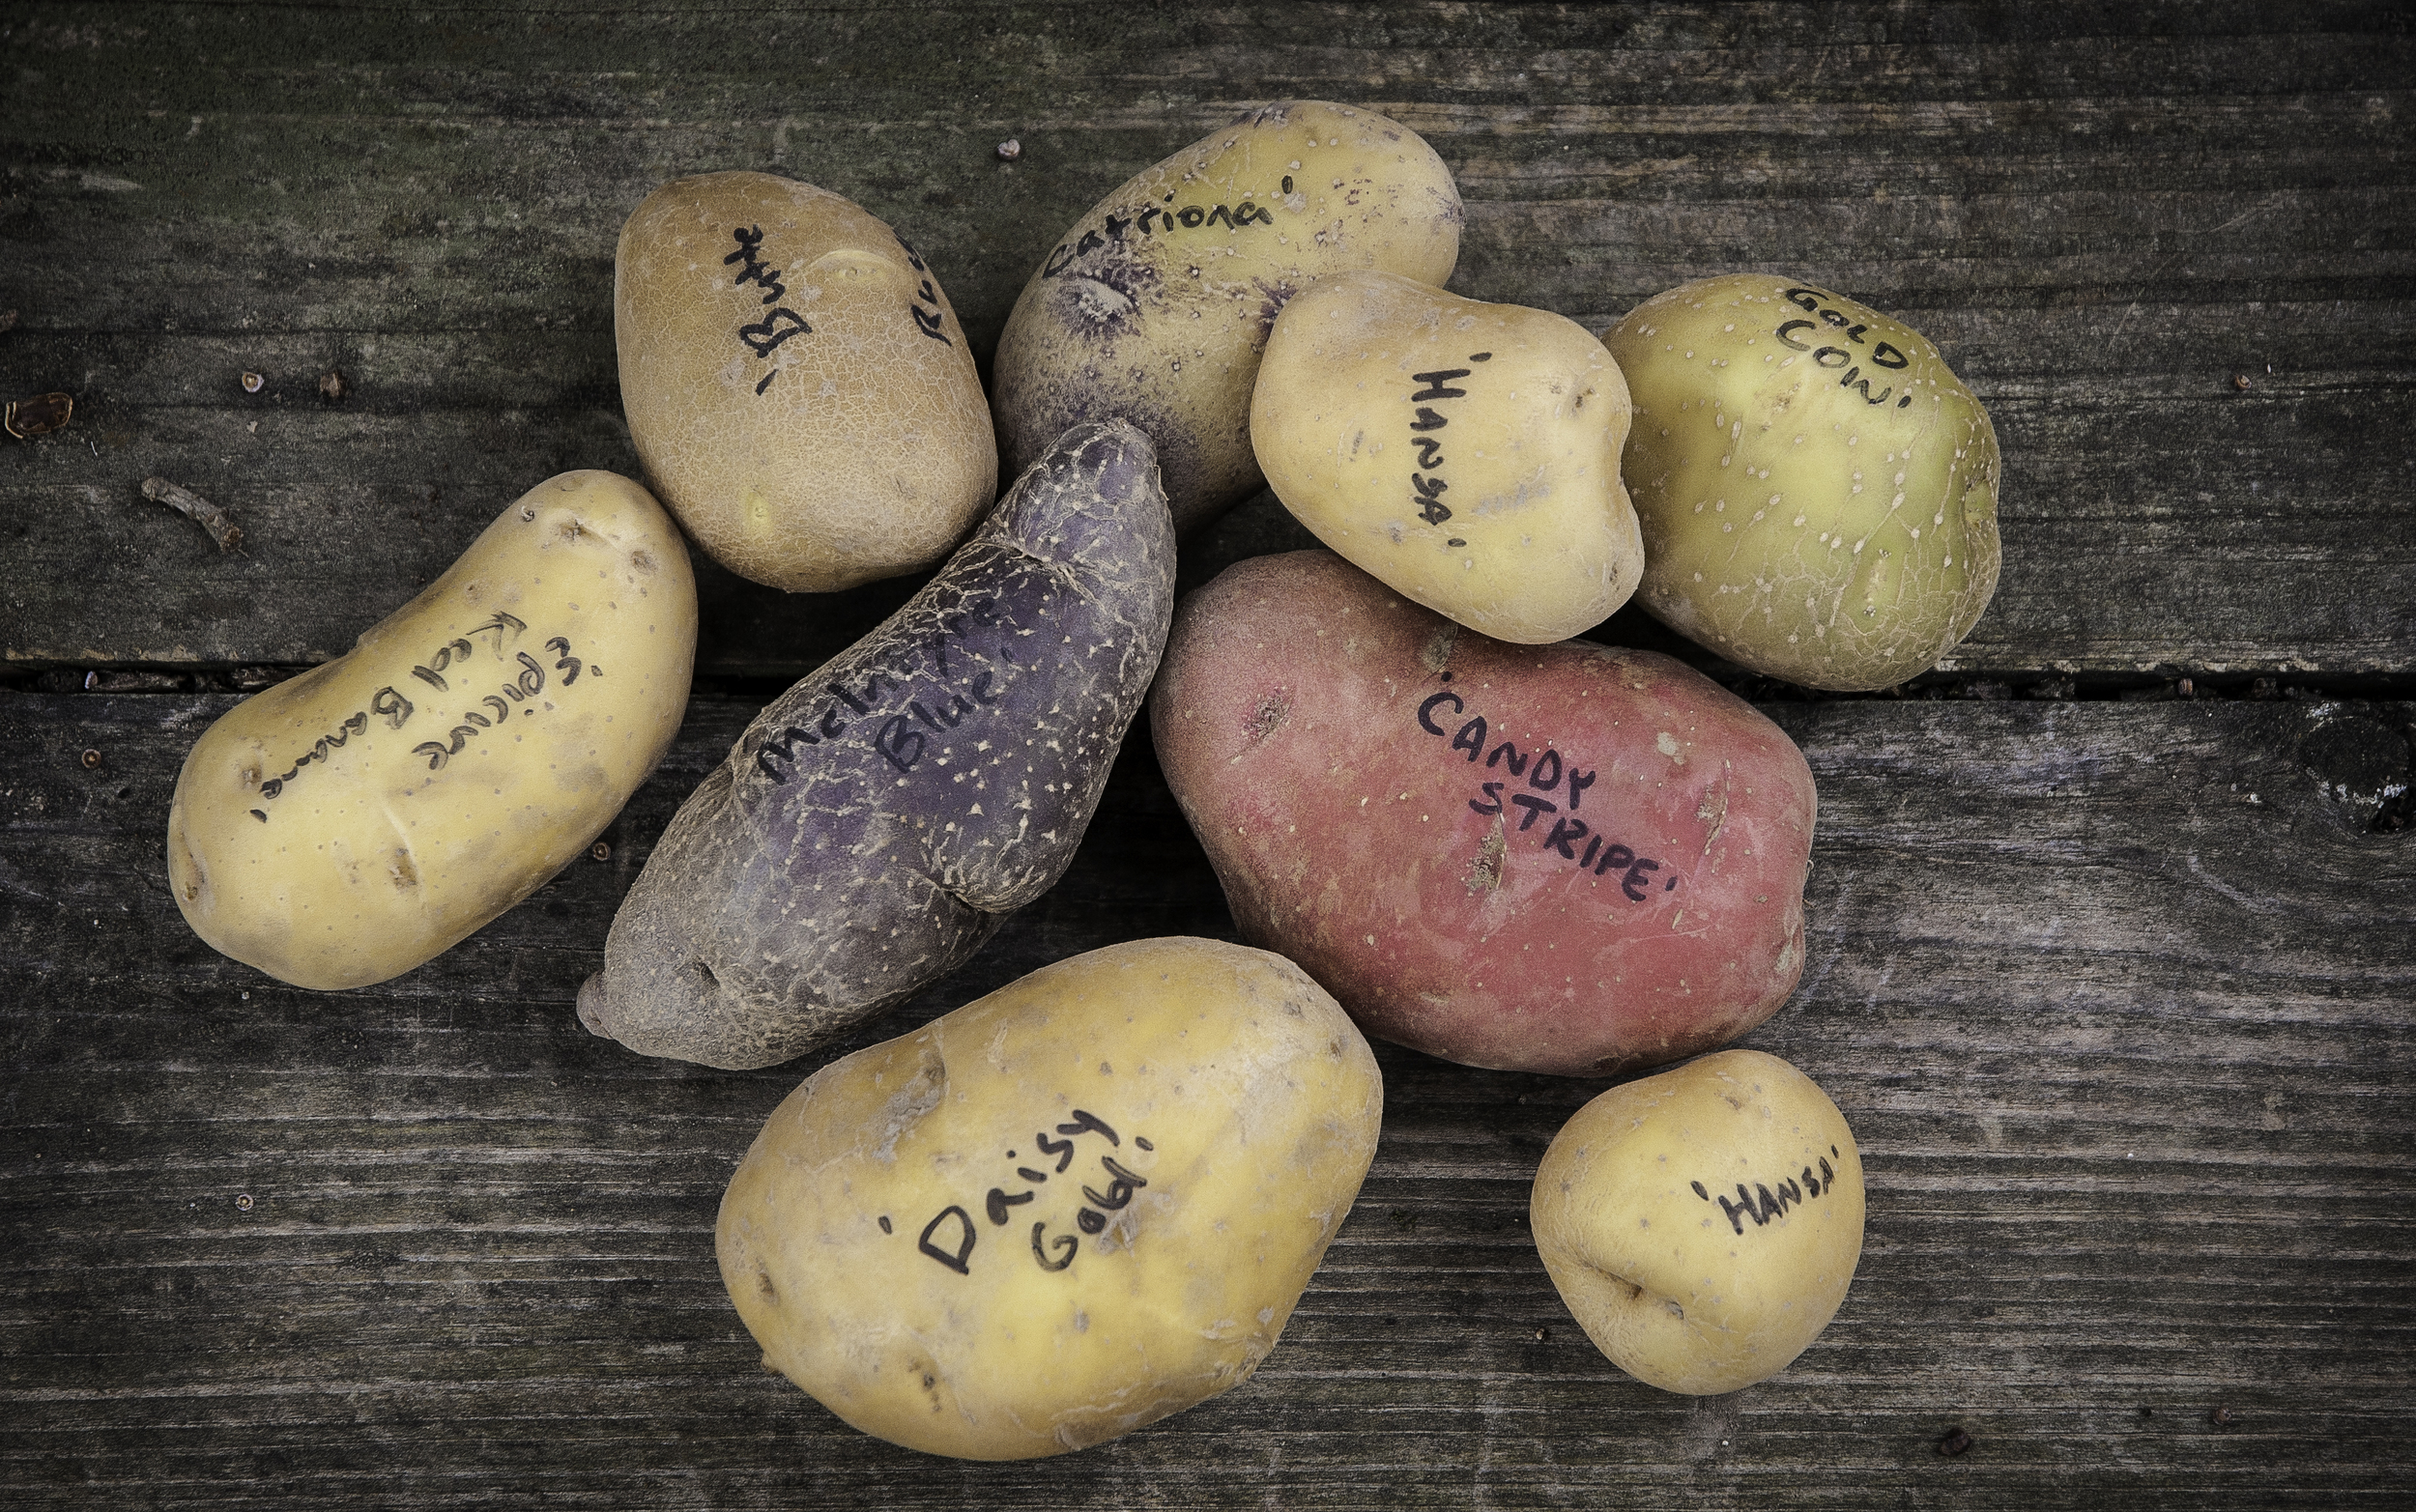 A group of potatoes grown in varying in color and size and labeled with black marker on a wooden surface